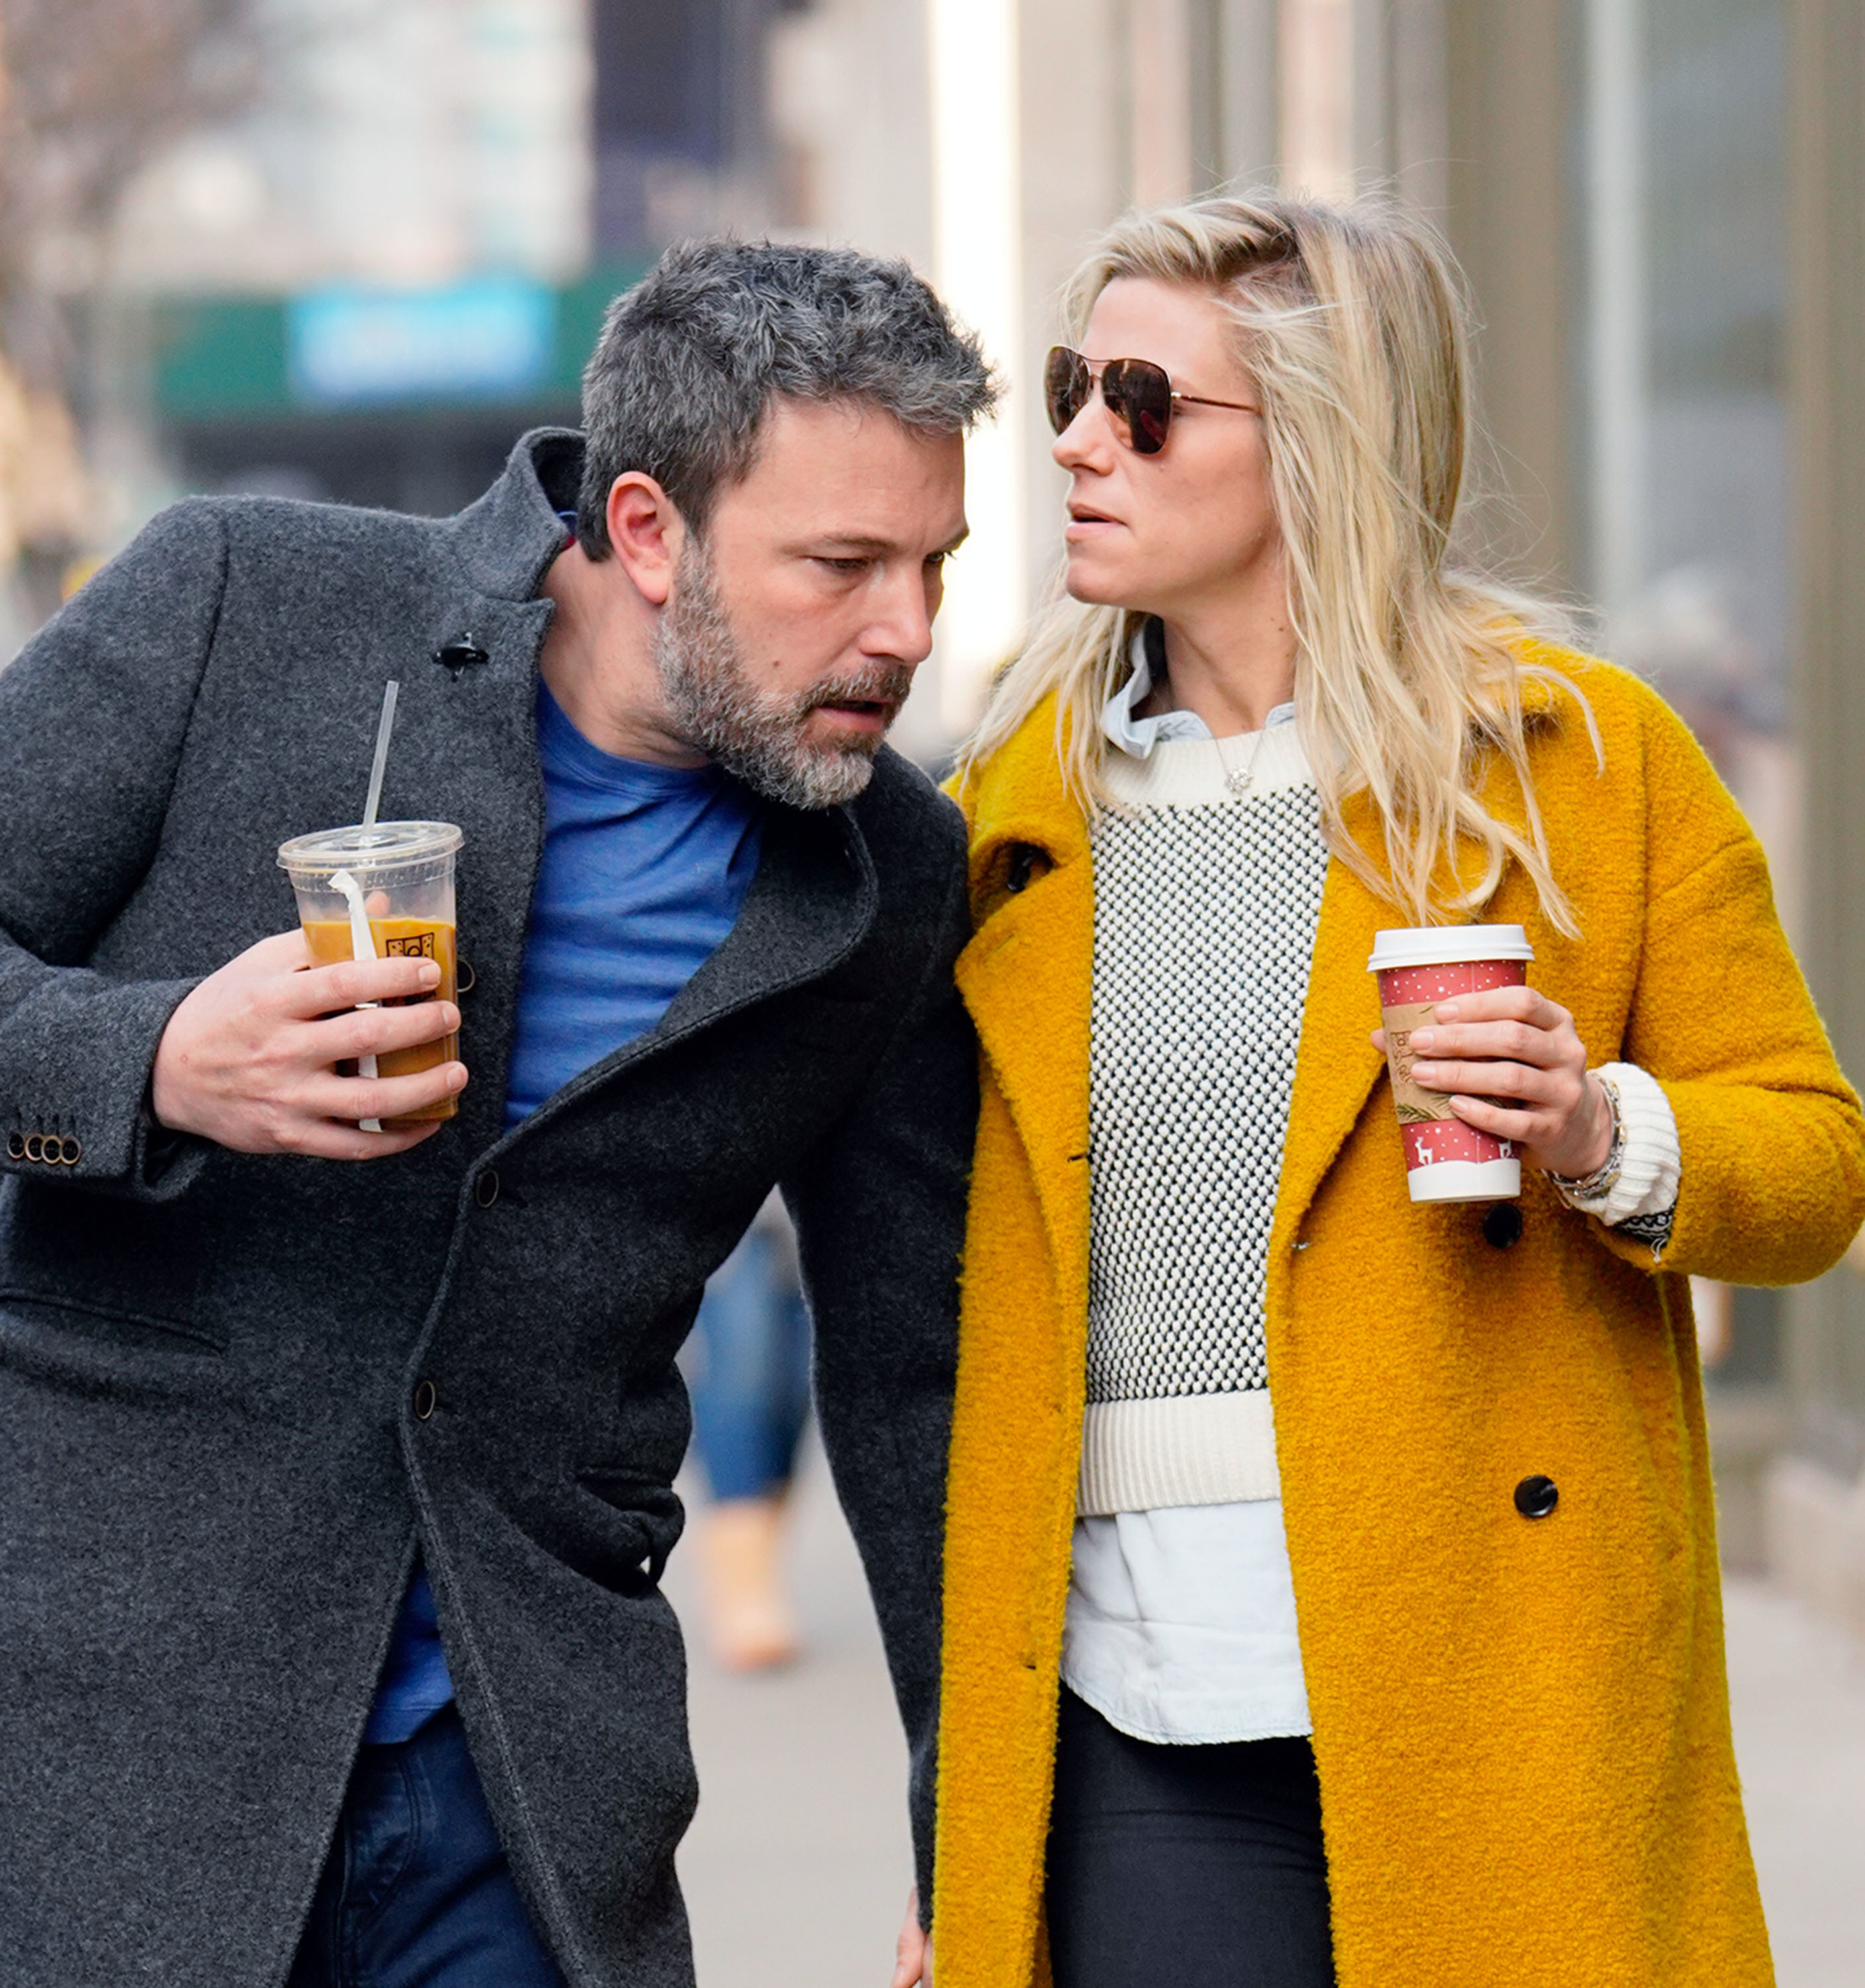 Two individuals walking closely, one in a gray coat, the other in a yellow coat, both holding beverages